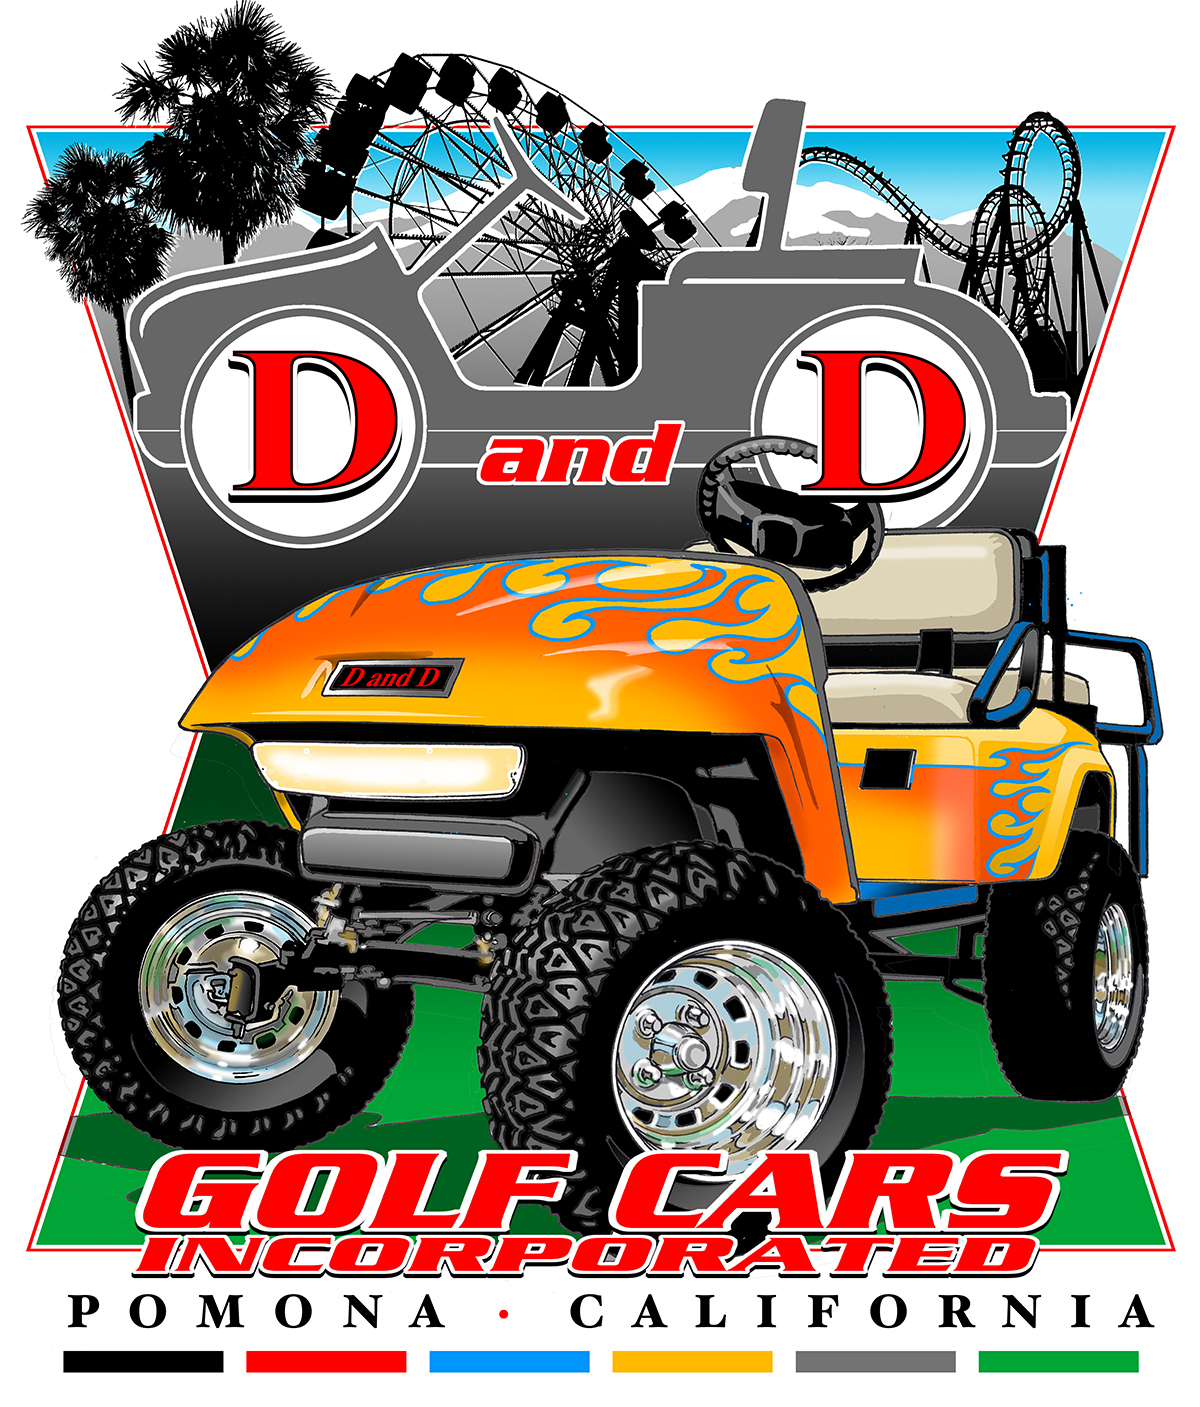 D and D Golf cars